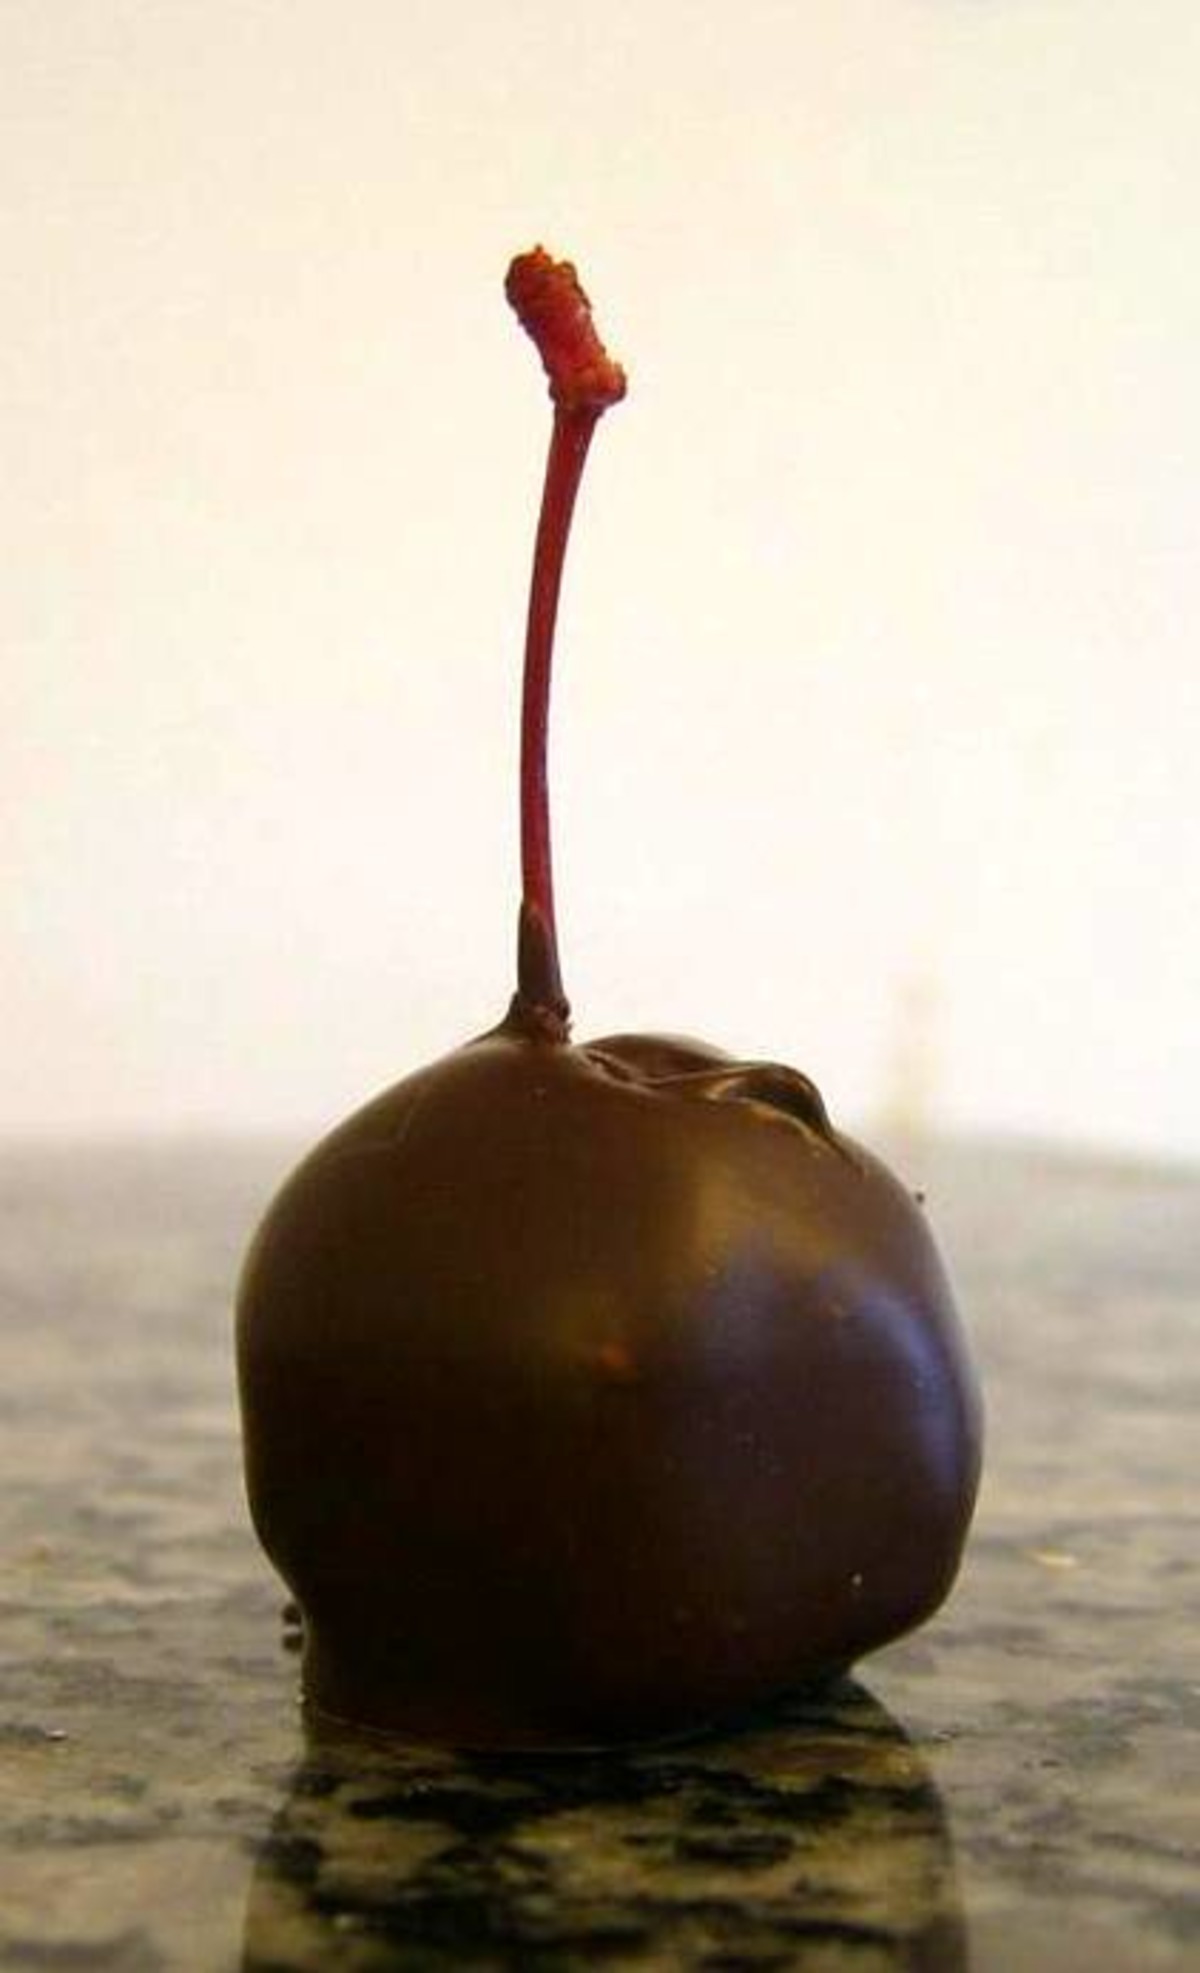 Double Chocolate Covered Cherries image